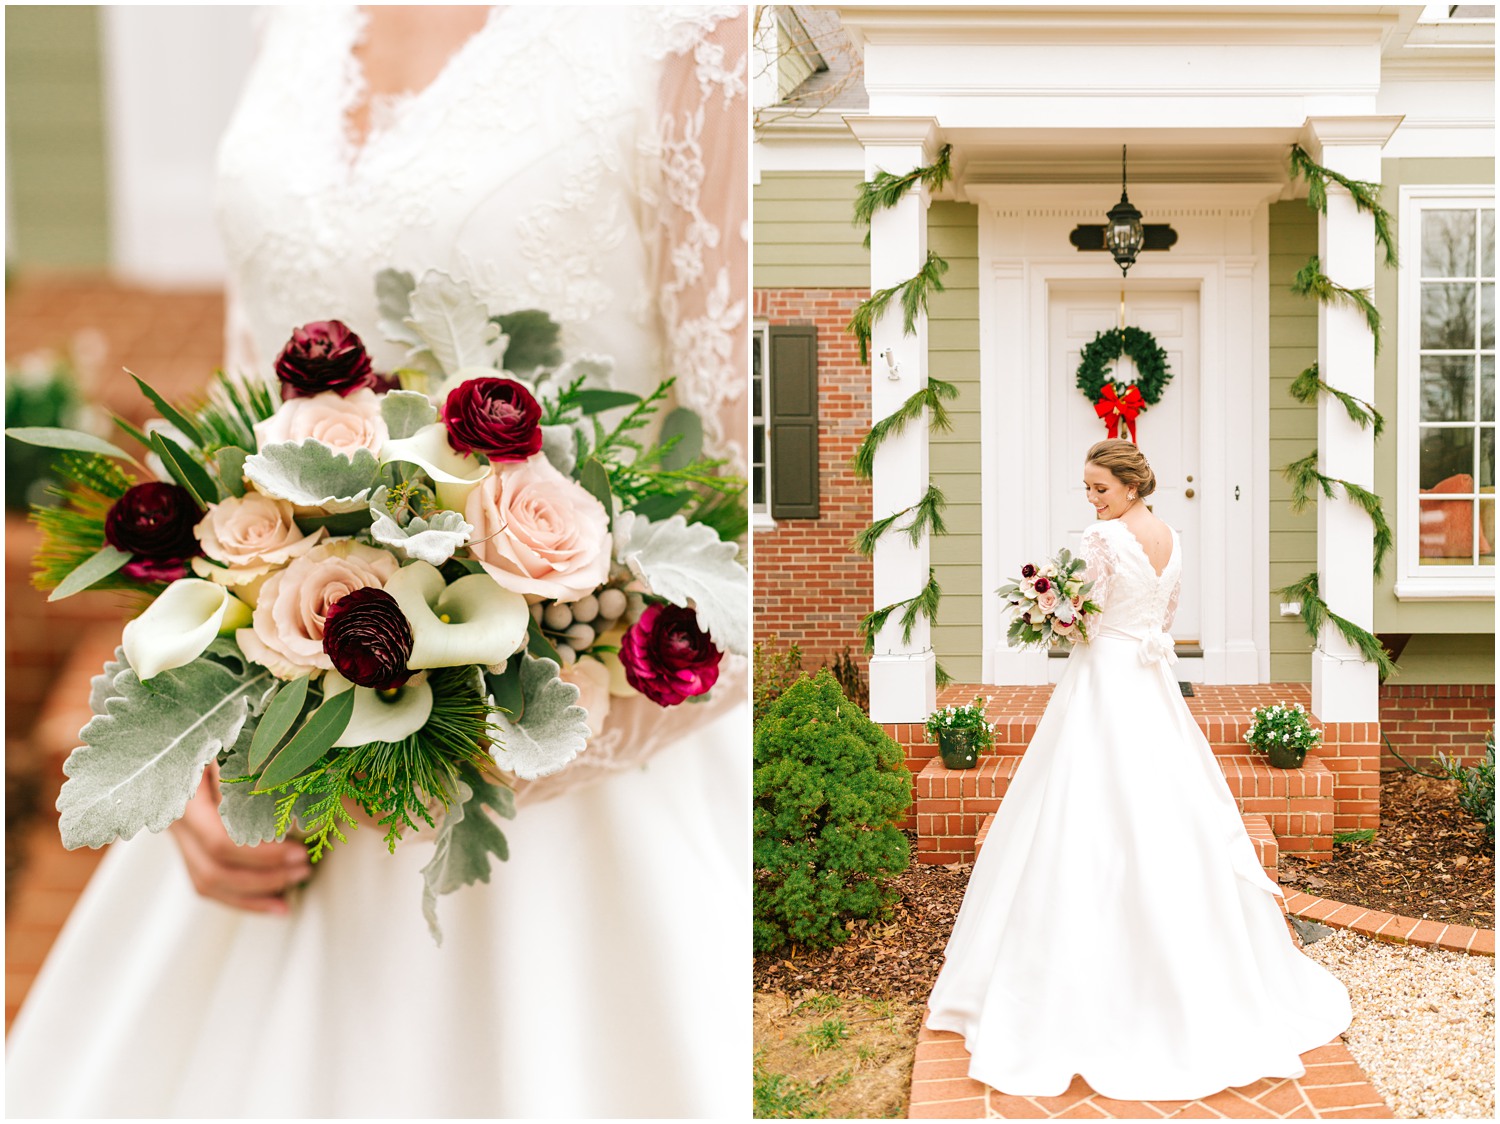 Chelsea Renay Photography photographs bride outside childhood home with Christmas decorations and bridal bouquet